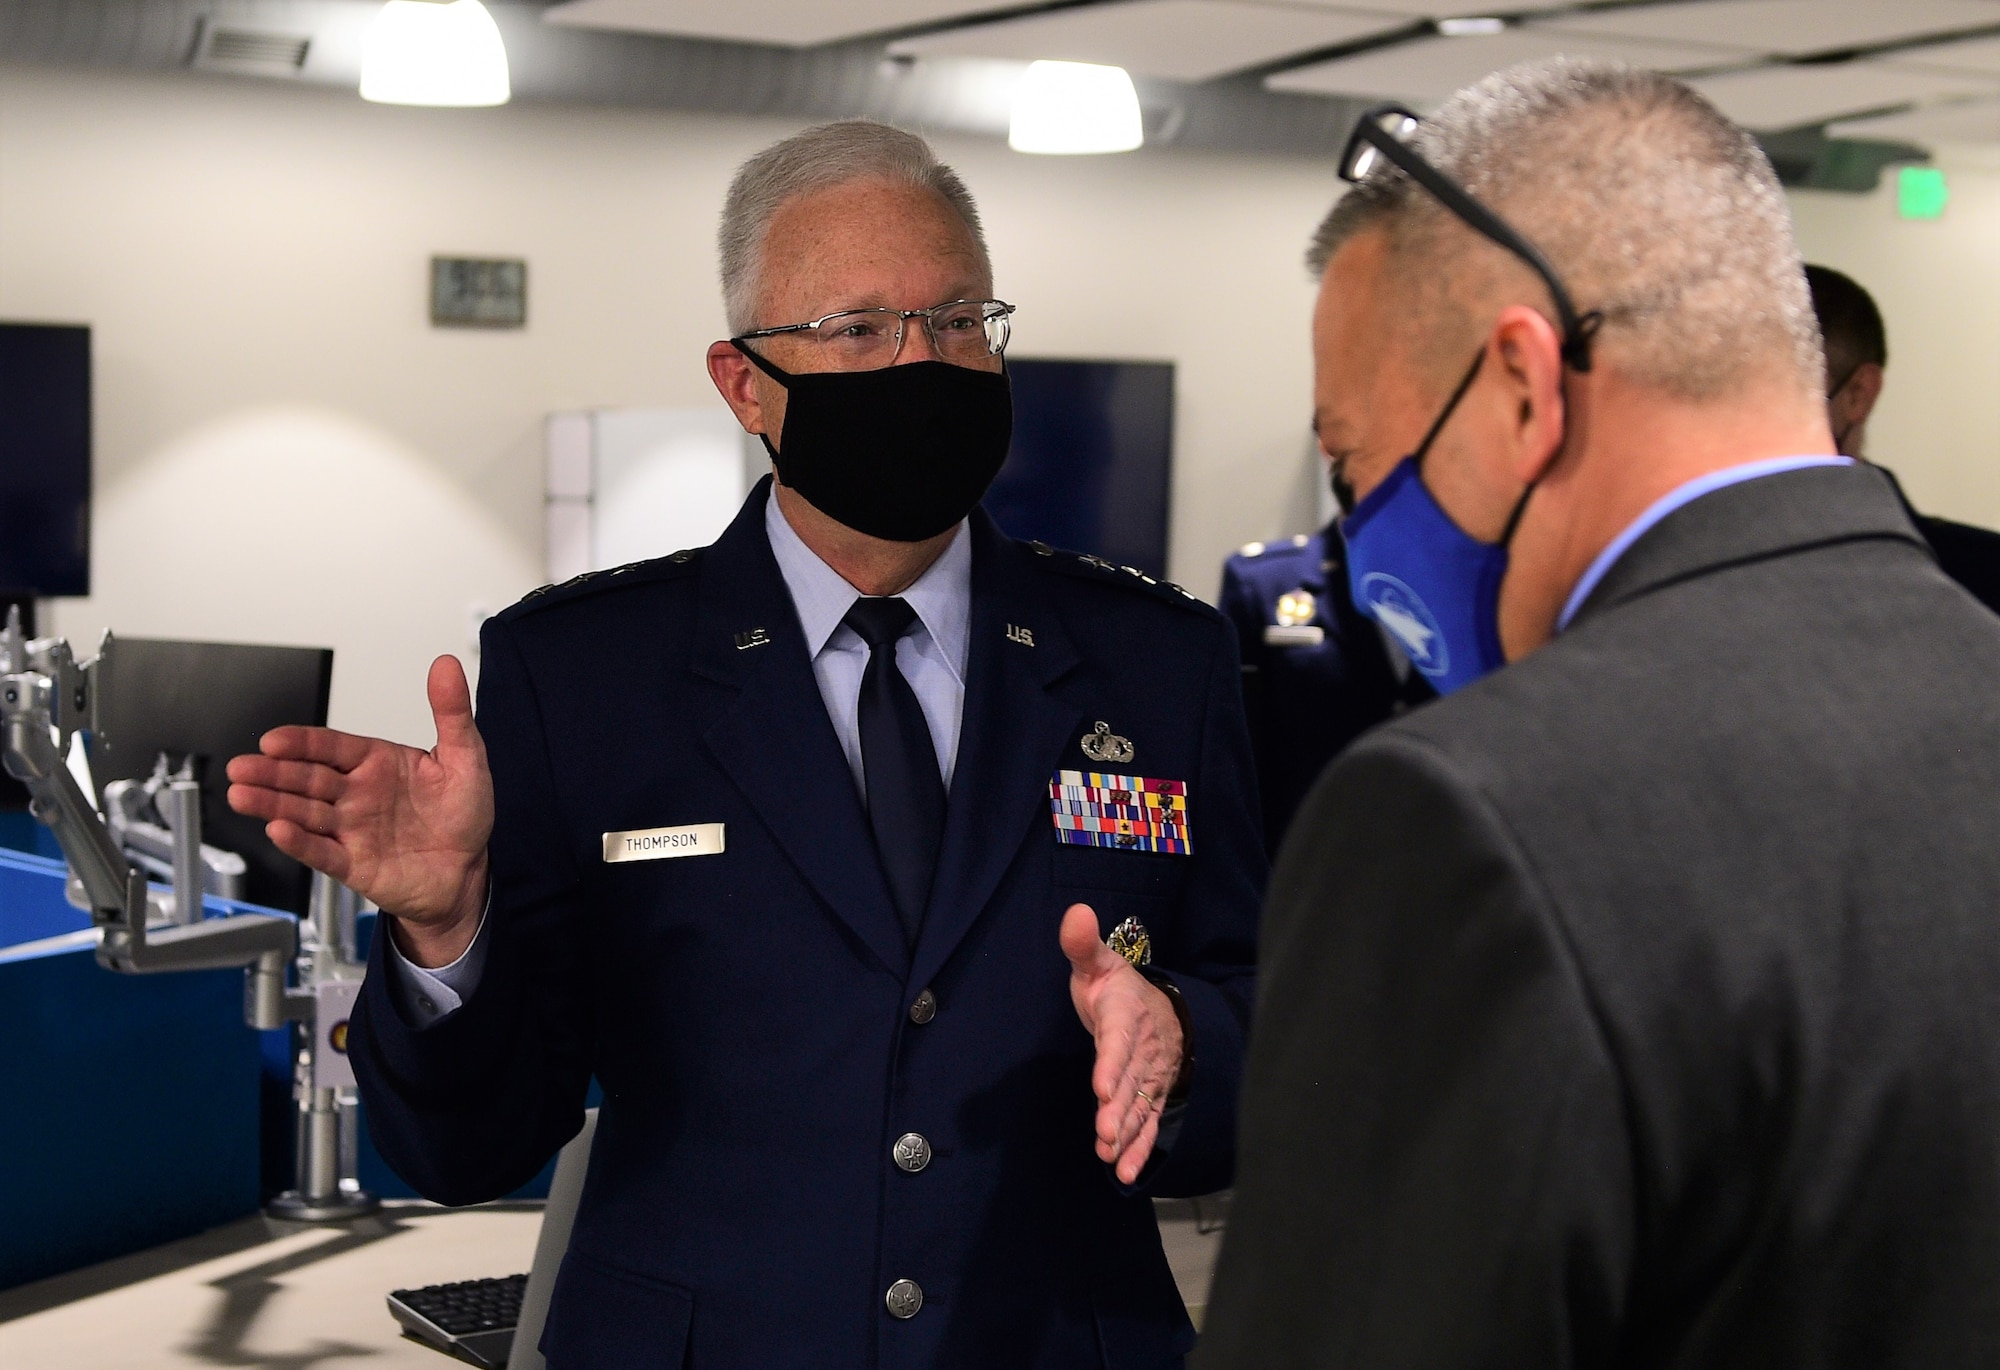 Lt. Gen. John F. Thompson, SMC commander and program executive officer for Space speaks to an attendee during the grand re-opening ceremony of  SMC’s newly renovated state-of-the-art TAP Lab on Mar. 31, 2021 in Boulder, Colo. (U.S. Space Force photo by Senior Airman Danielle McBride)